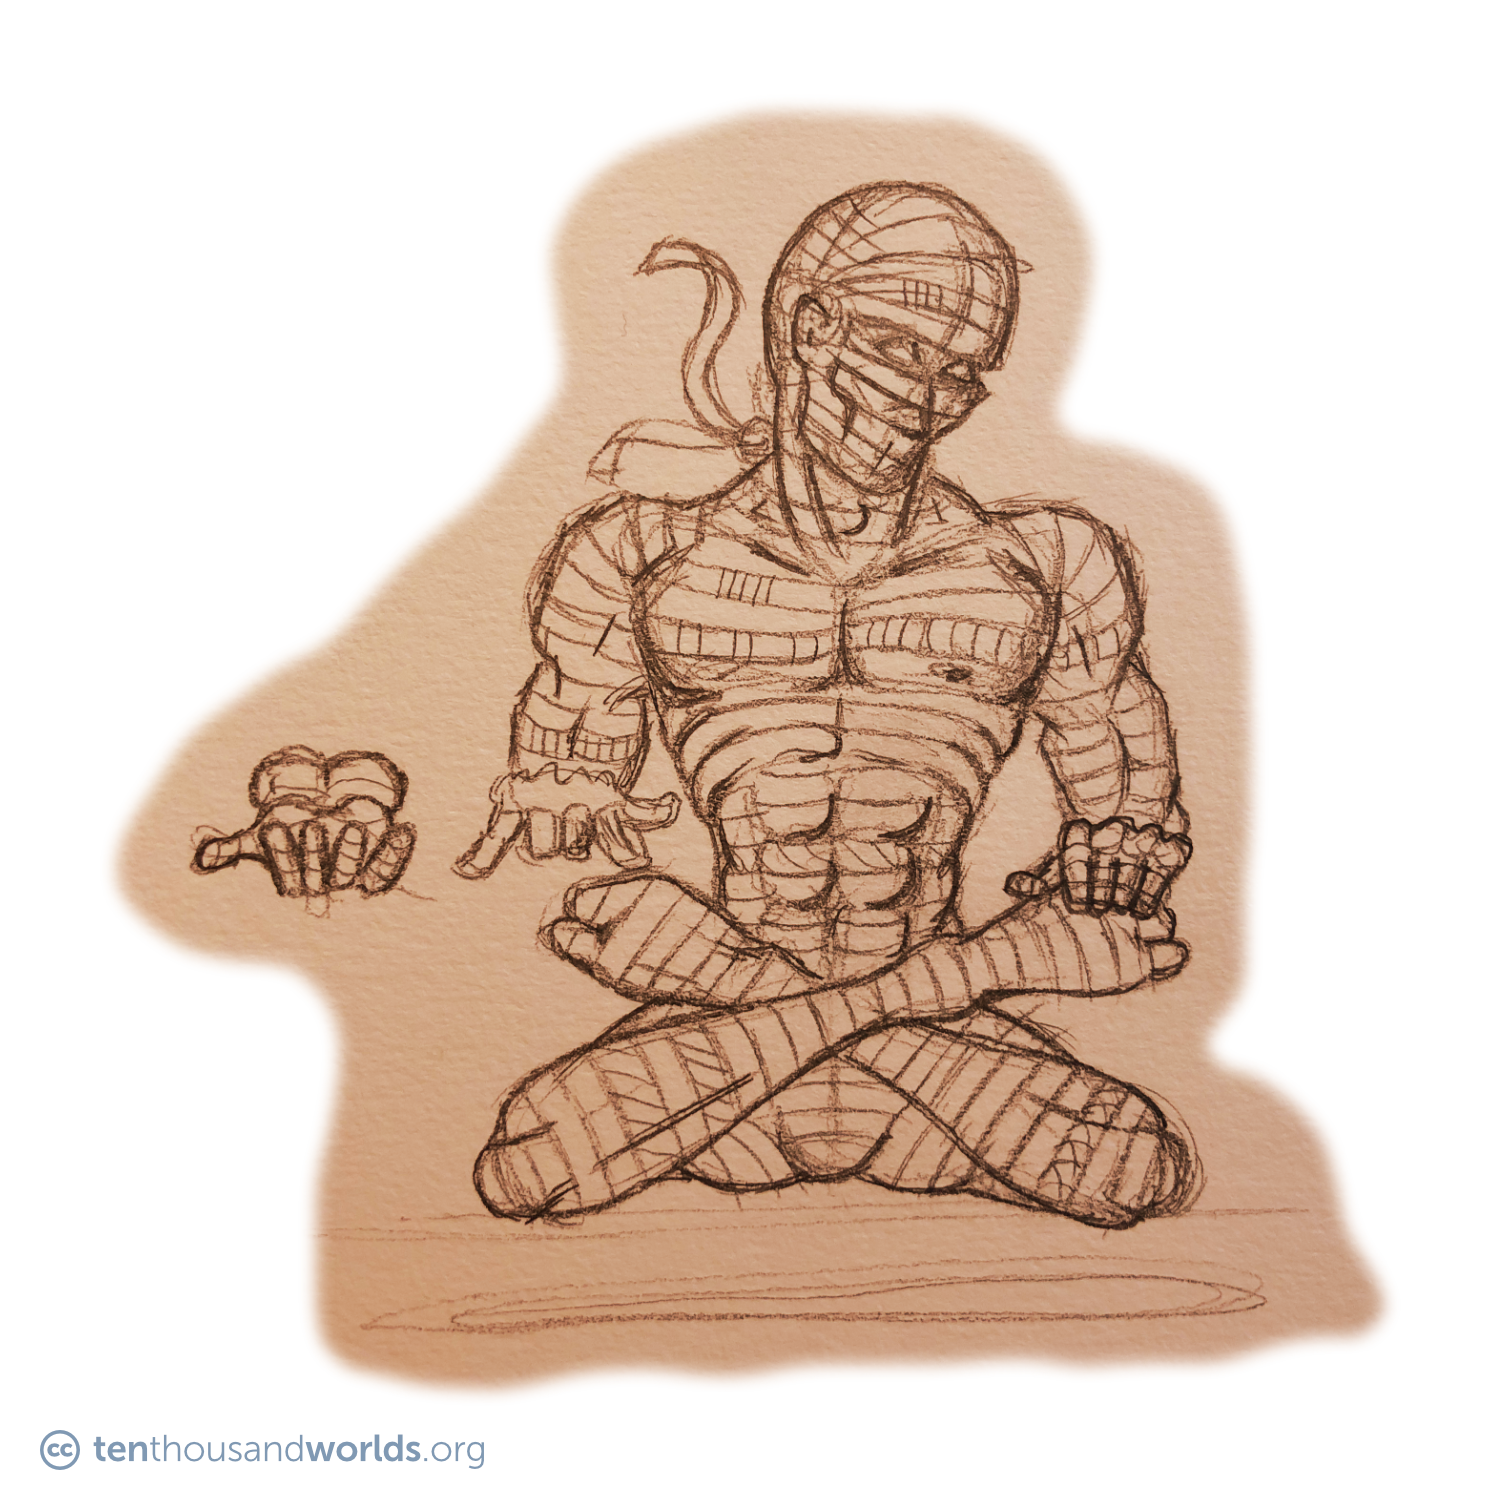 A pencil sketch of a cross-legged man-like being wrapped head-to toe in bandages.